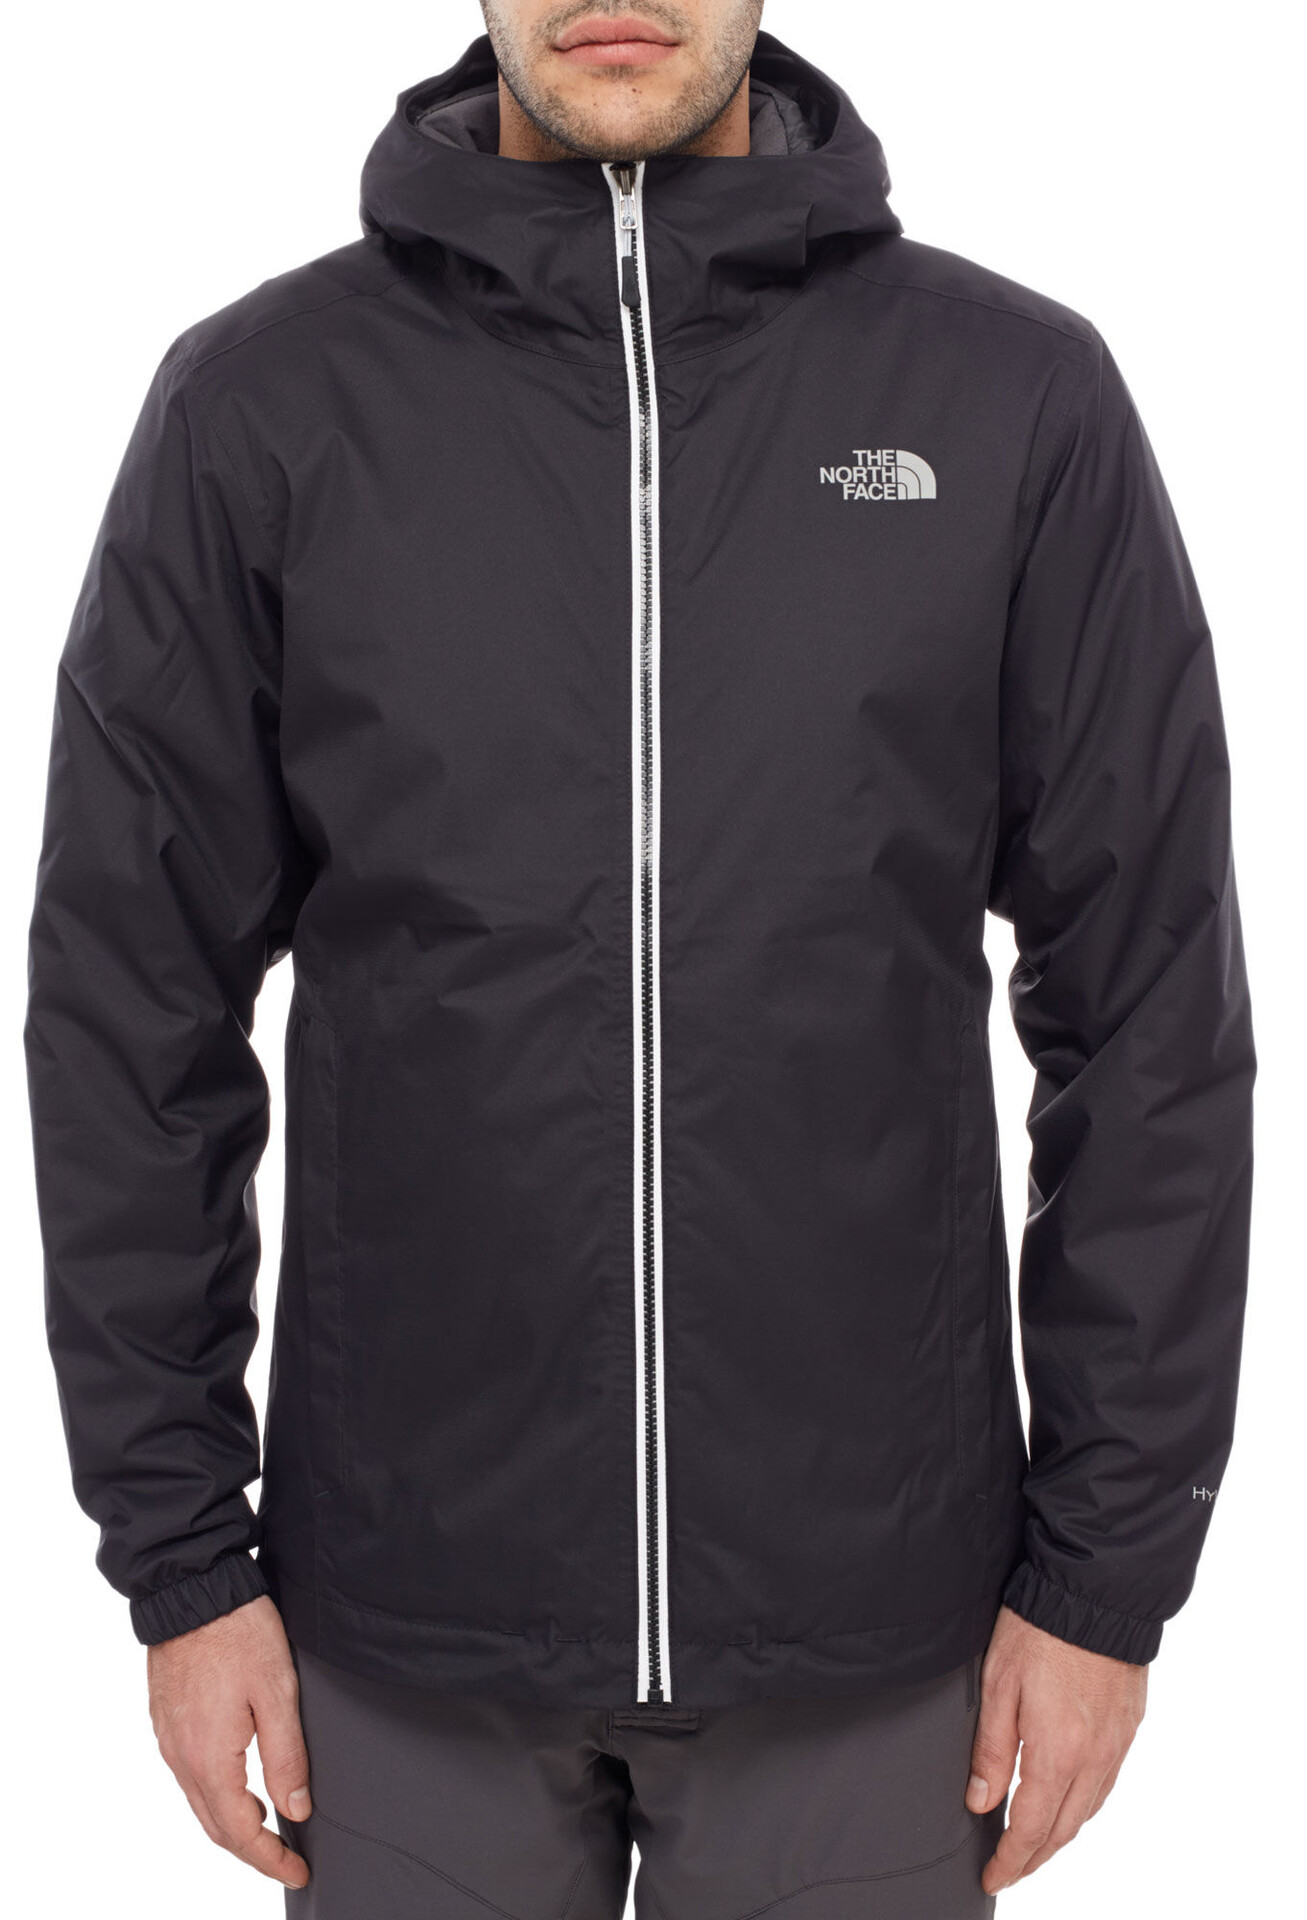 quest insulated jacket